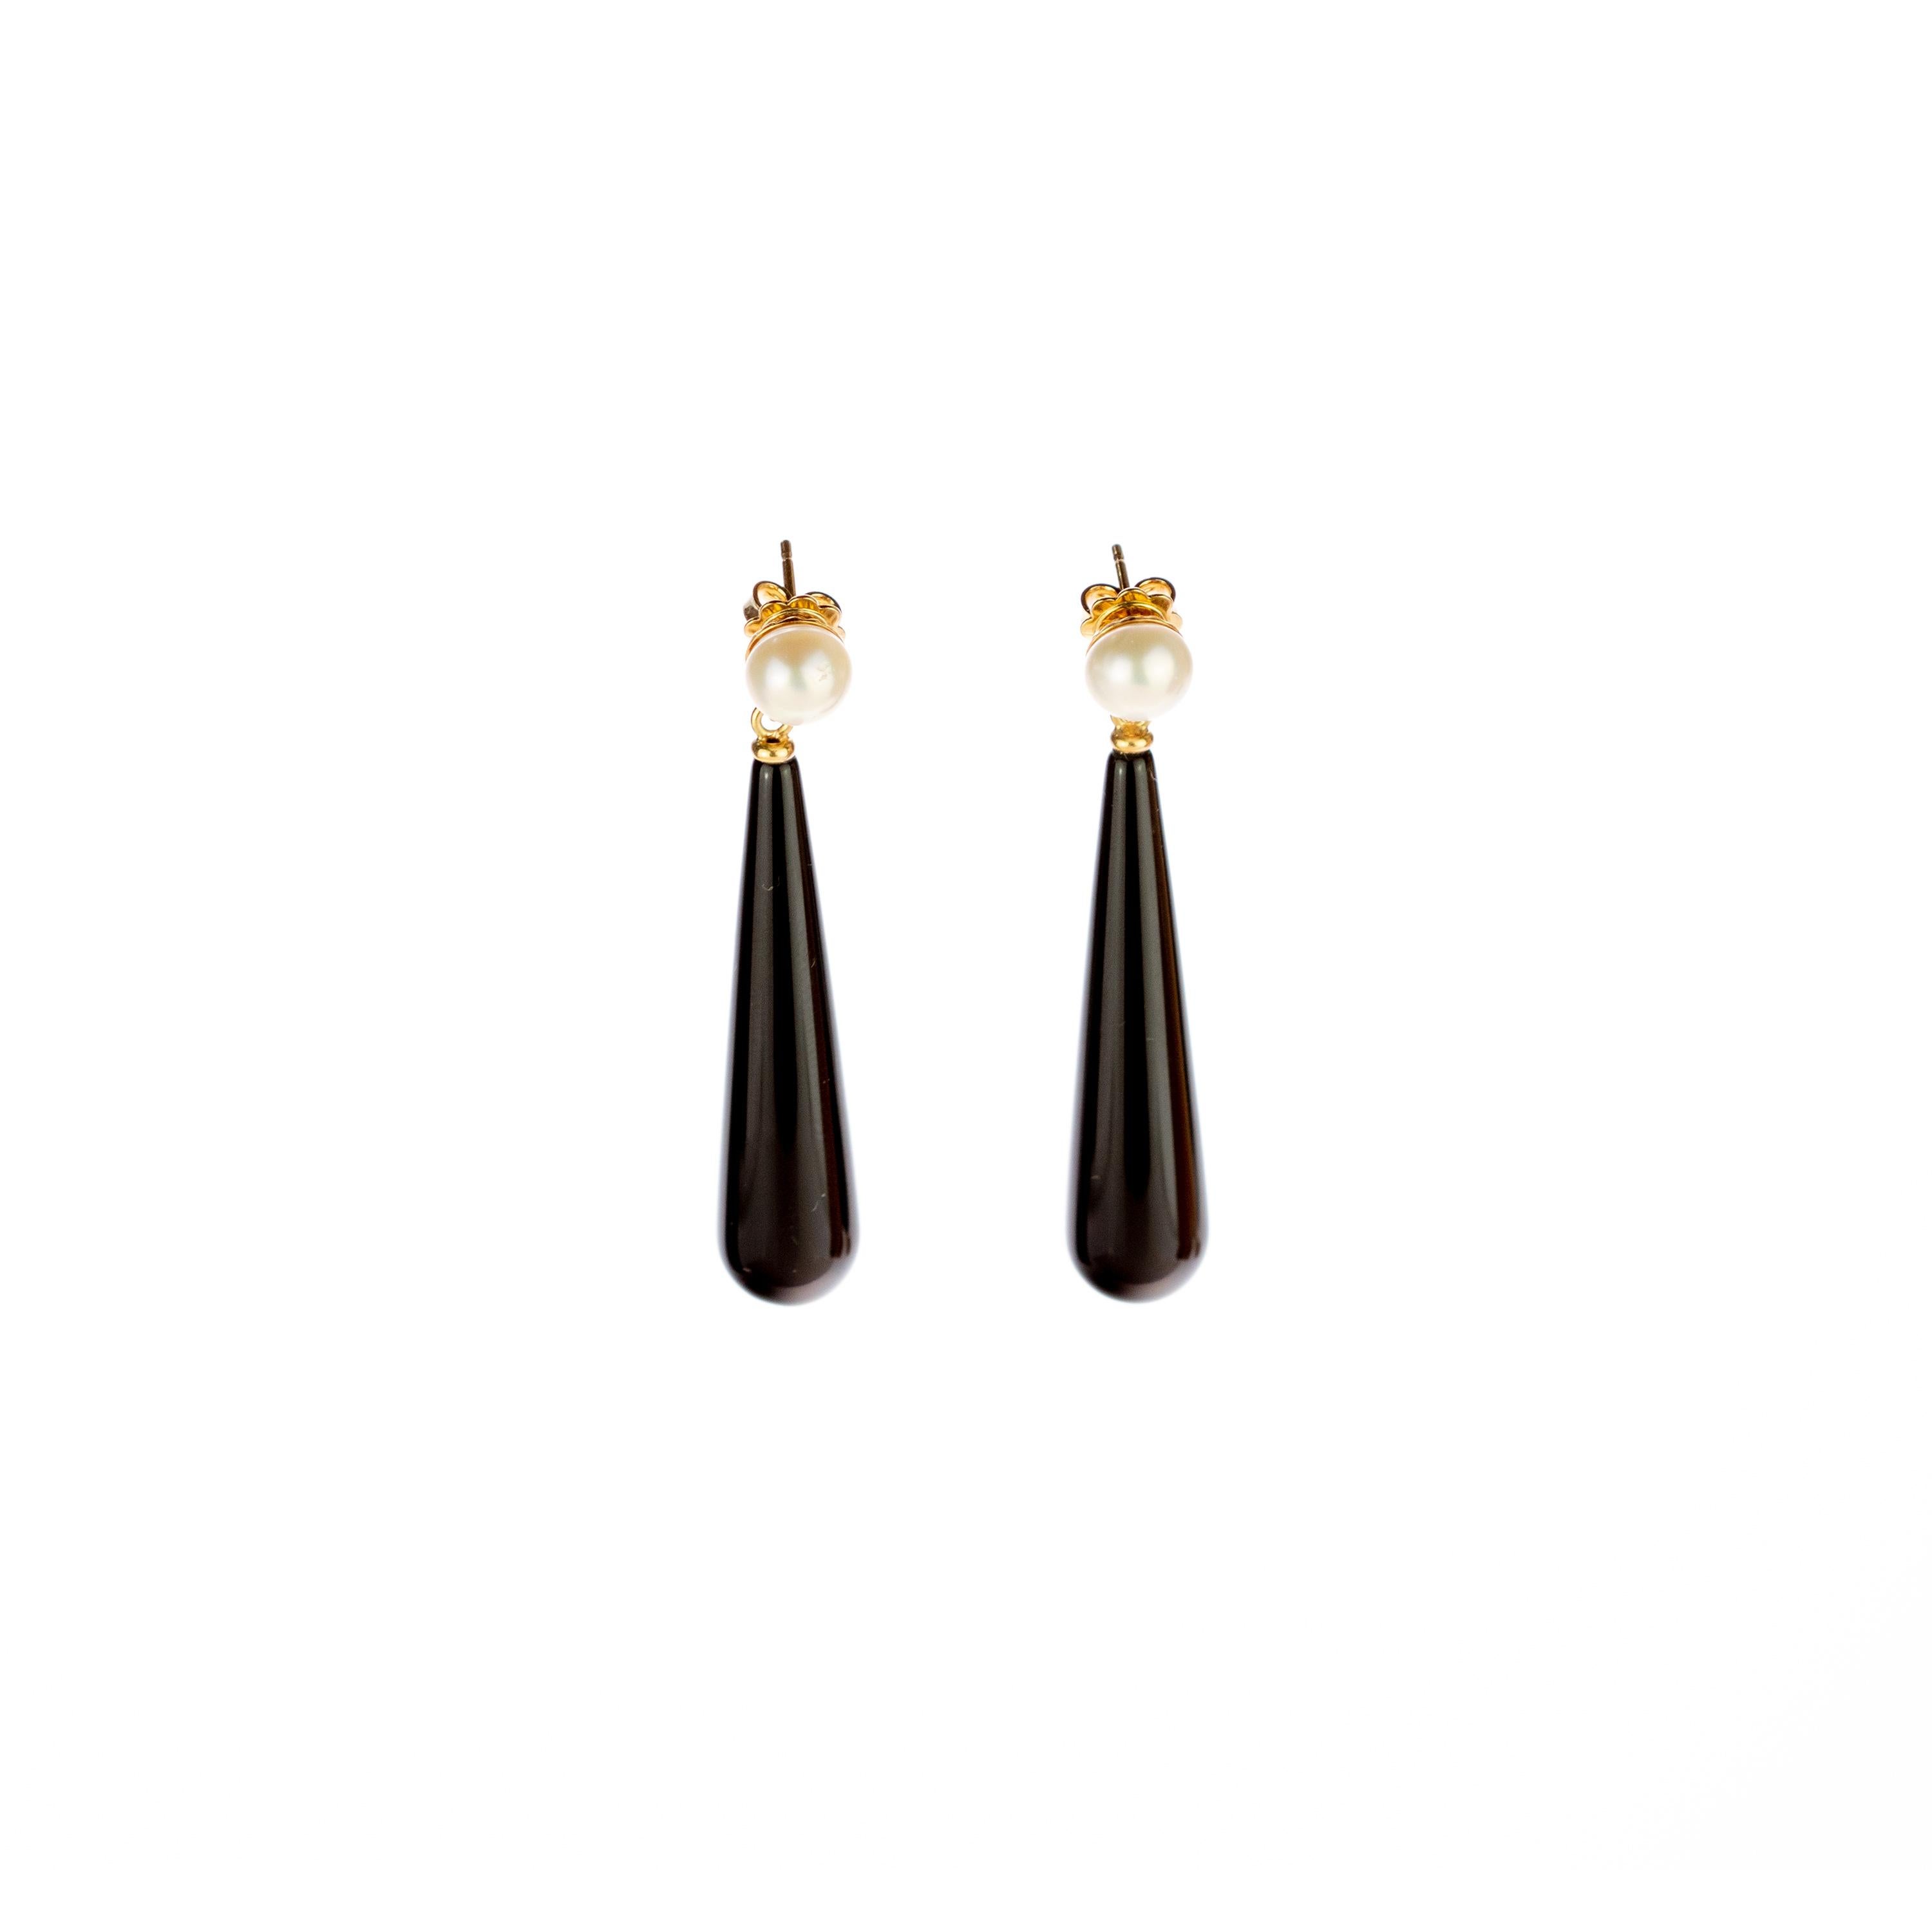 Fresh and youthful black bold agate earrings with a round natural pearl on top. Holded by a 18 karat yellow gold that recreates a stylish piece of jewelry that can highlight any look. The perfect touch full of modernity with a tear drop and dangle